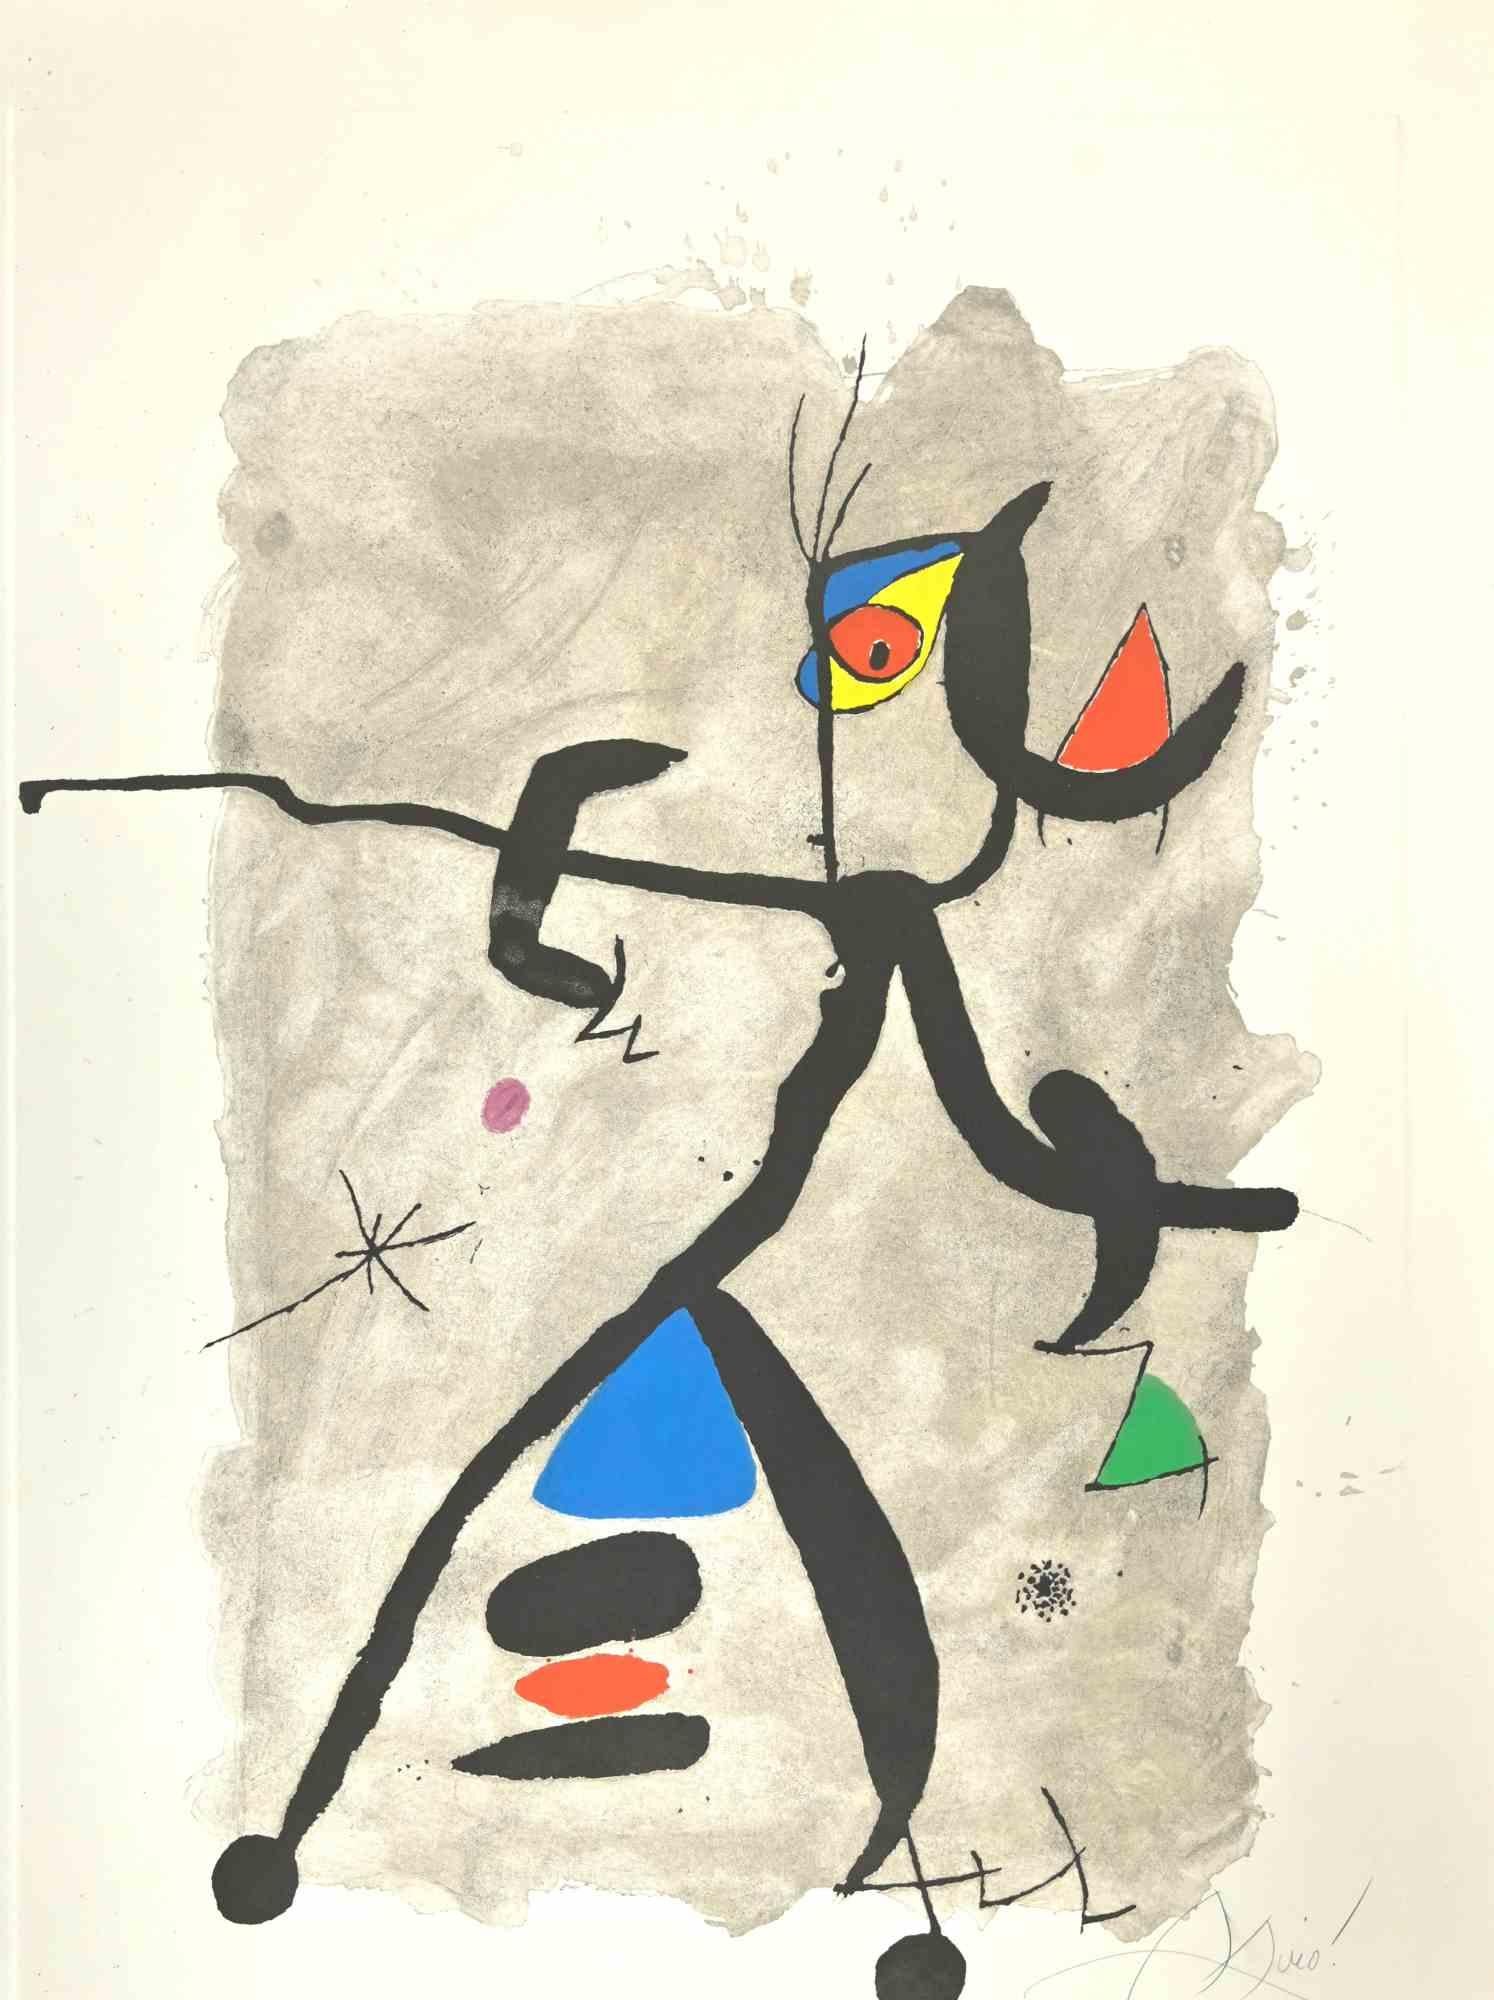 Joan Miró Abstract Print - For Alberti, For Spain! - Etching by Joan Mirò - 1975